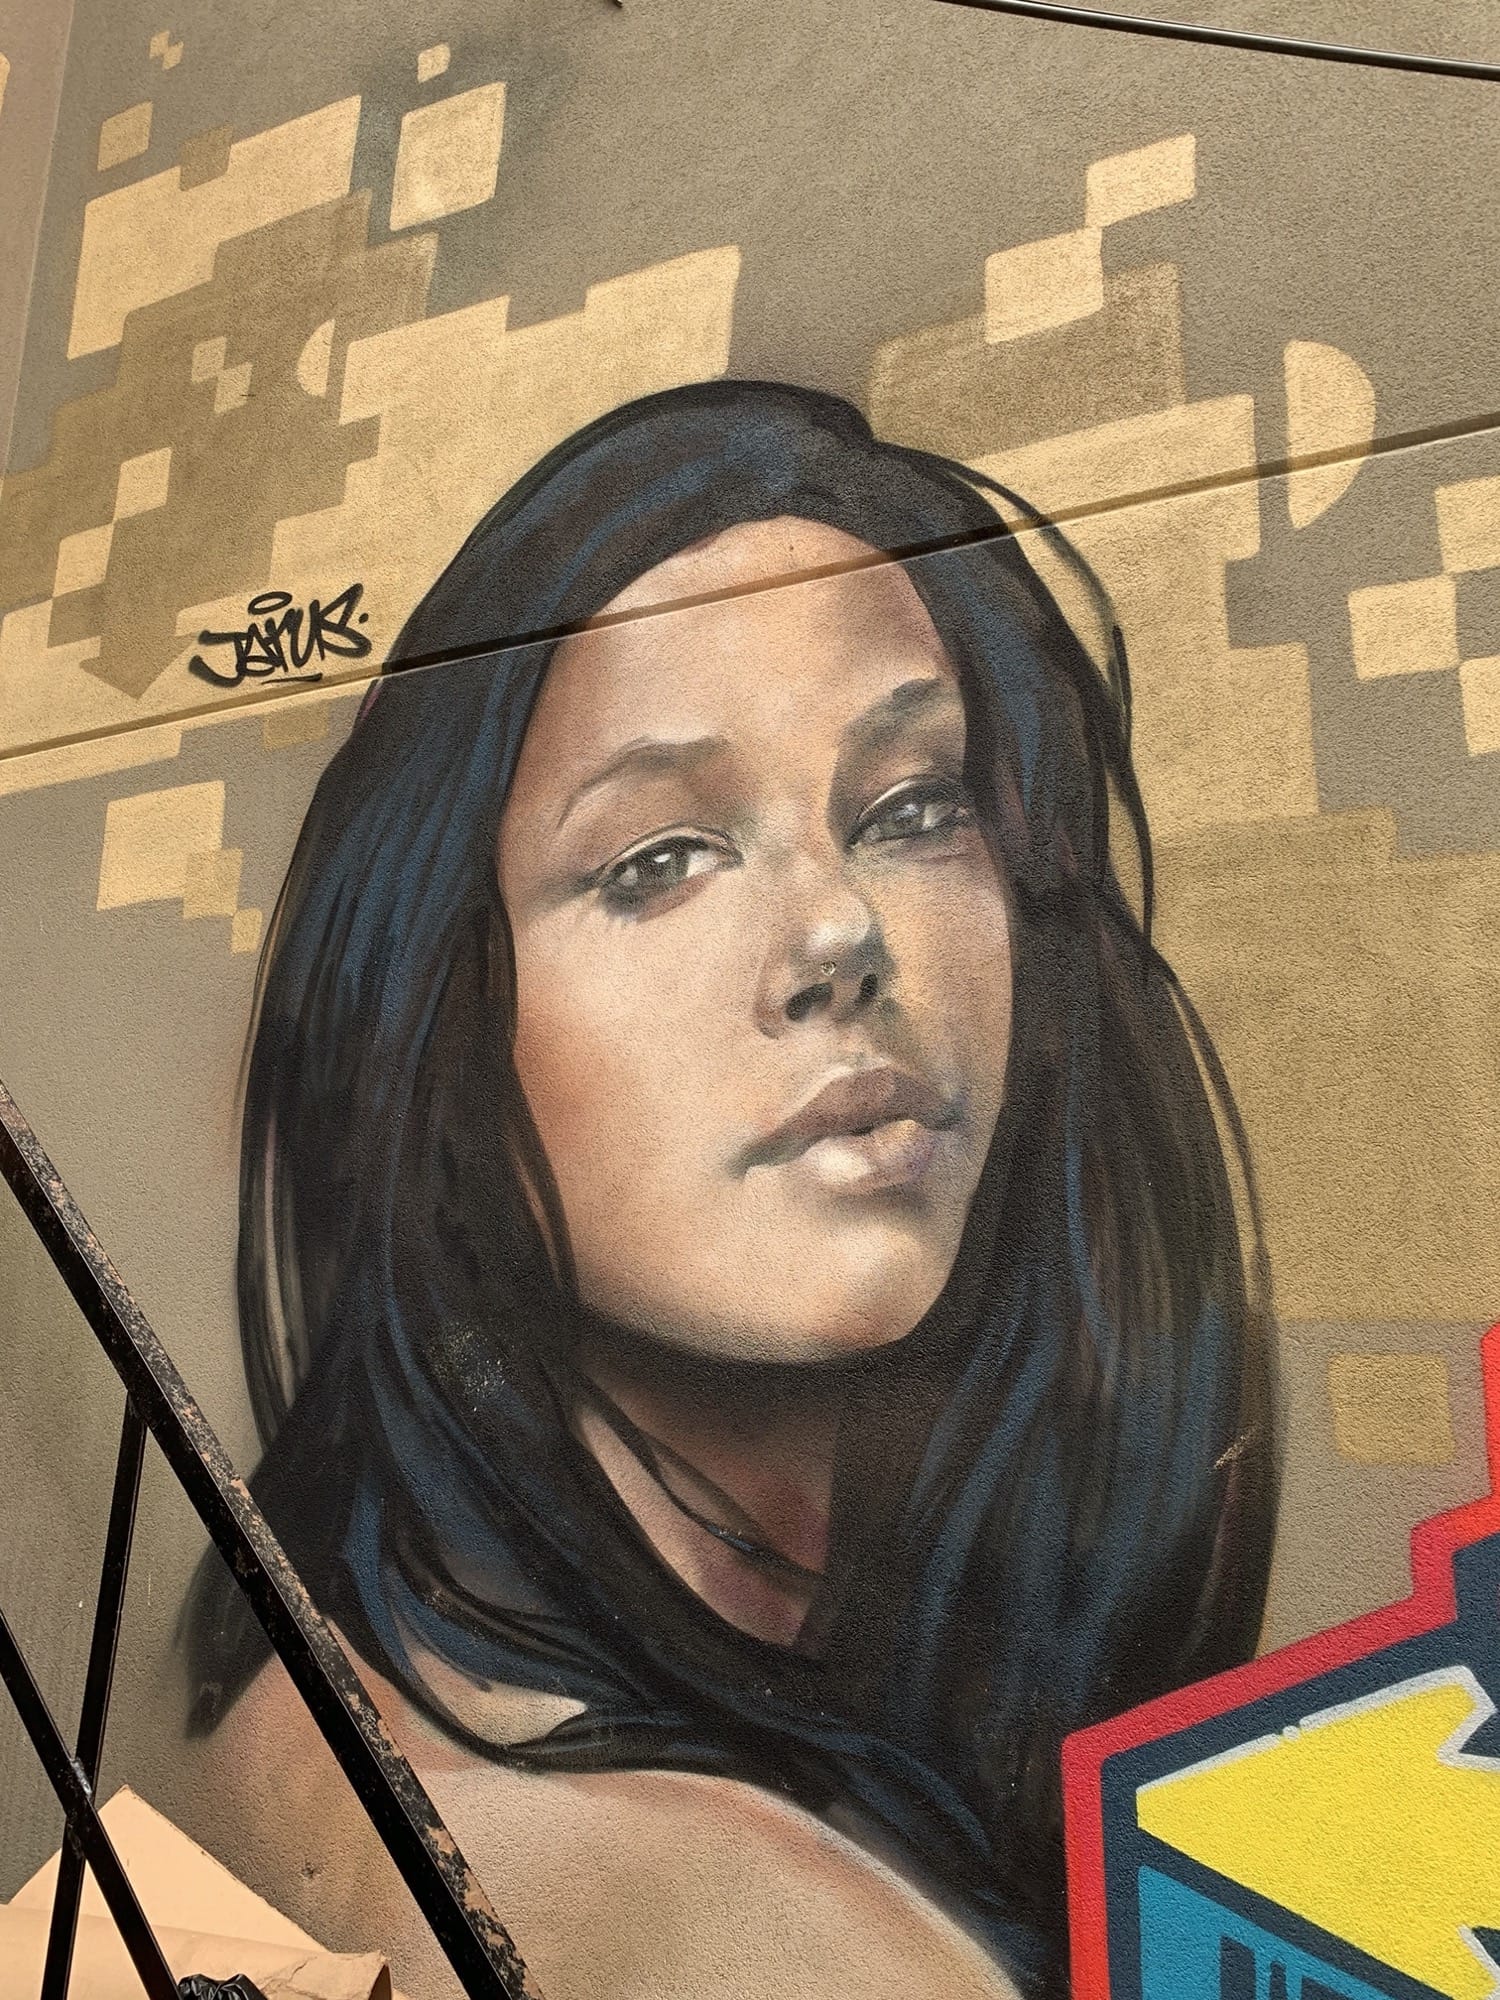 Graffiti 2563  captured by Rabot in Toronto Canada